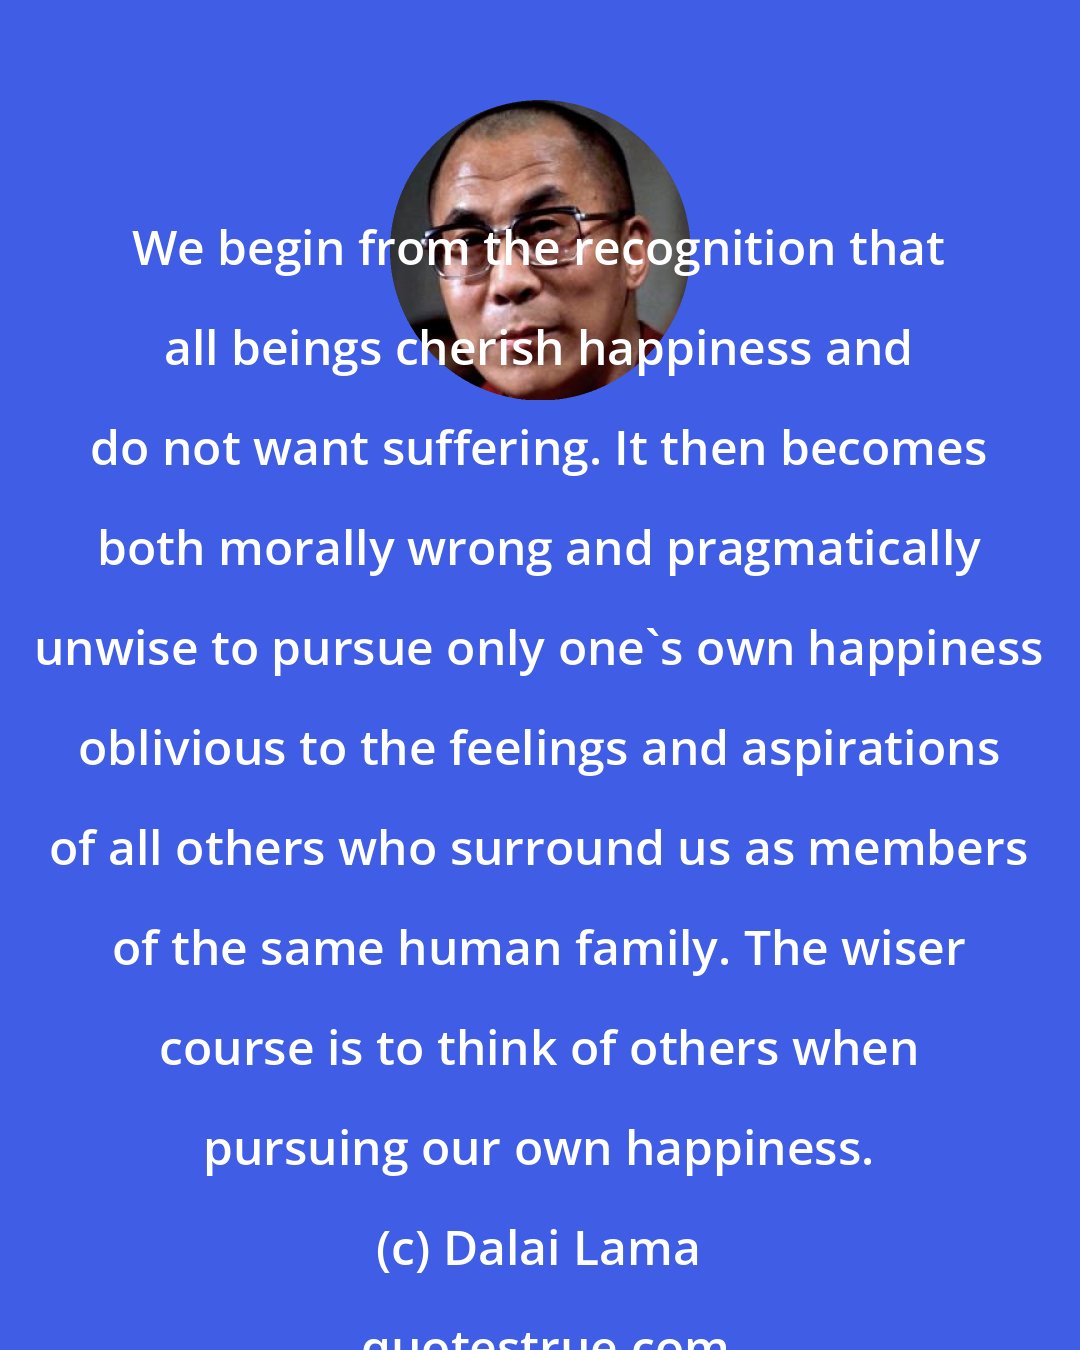 Dalai Lama: We begin from the recognition that all beings cherish happiness and do not want suffering. It then becomes both morally wrong and pragmatically unwise to pursue only one's own happiness oblivious to the feelings and aspirations of all others who surround us as members of the same human family. The wiser course is to think of others when pursuing our own happiness.